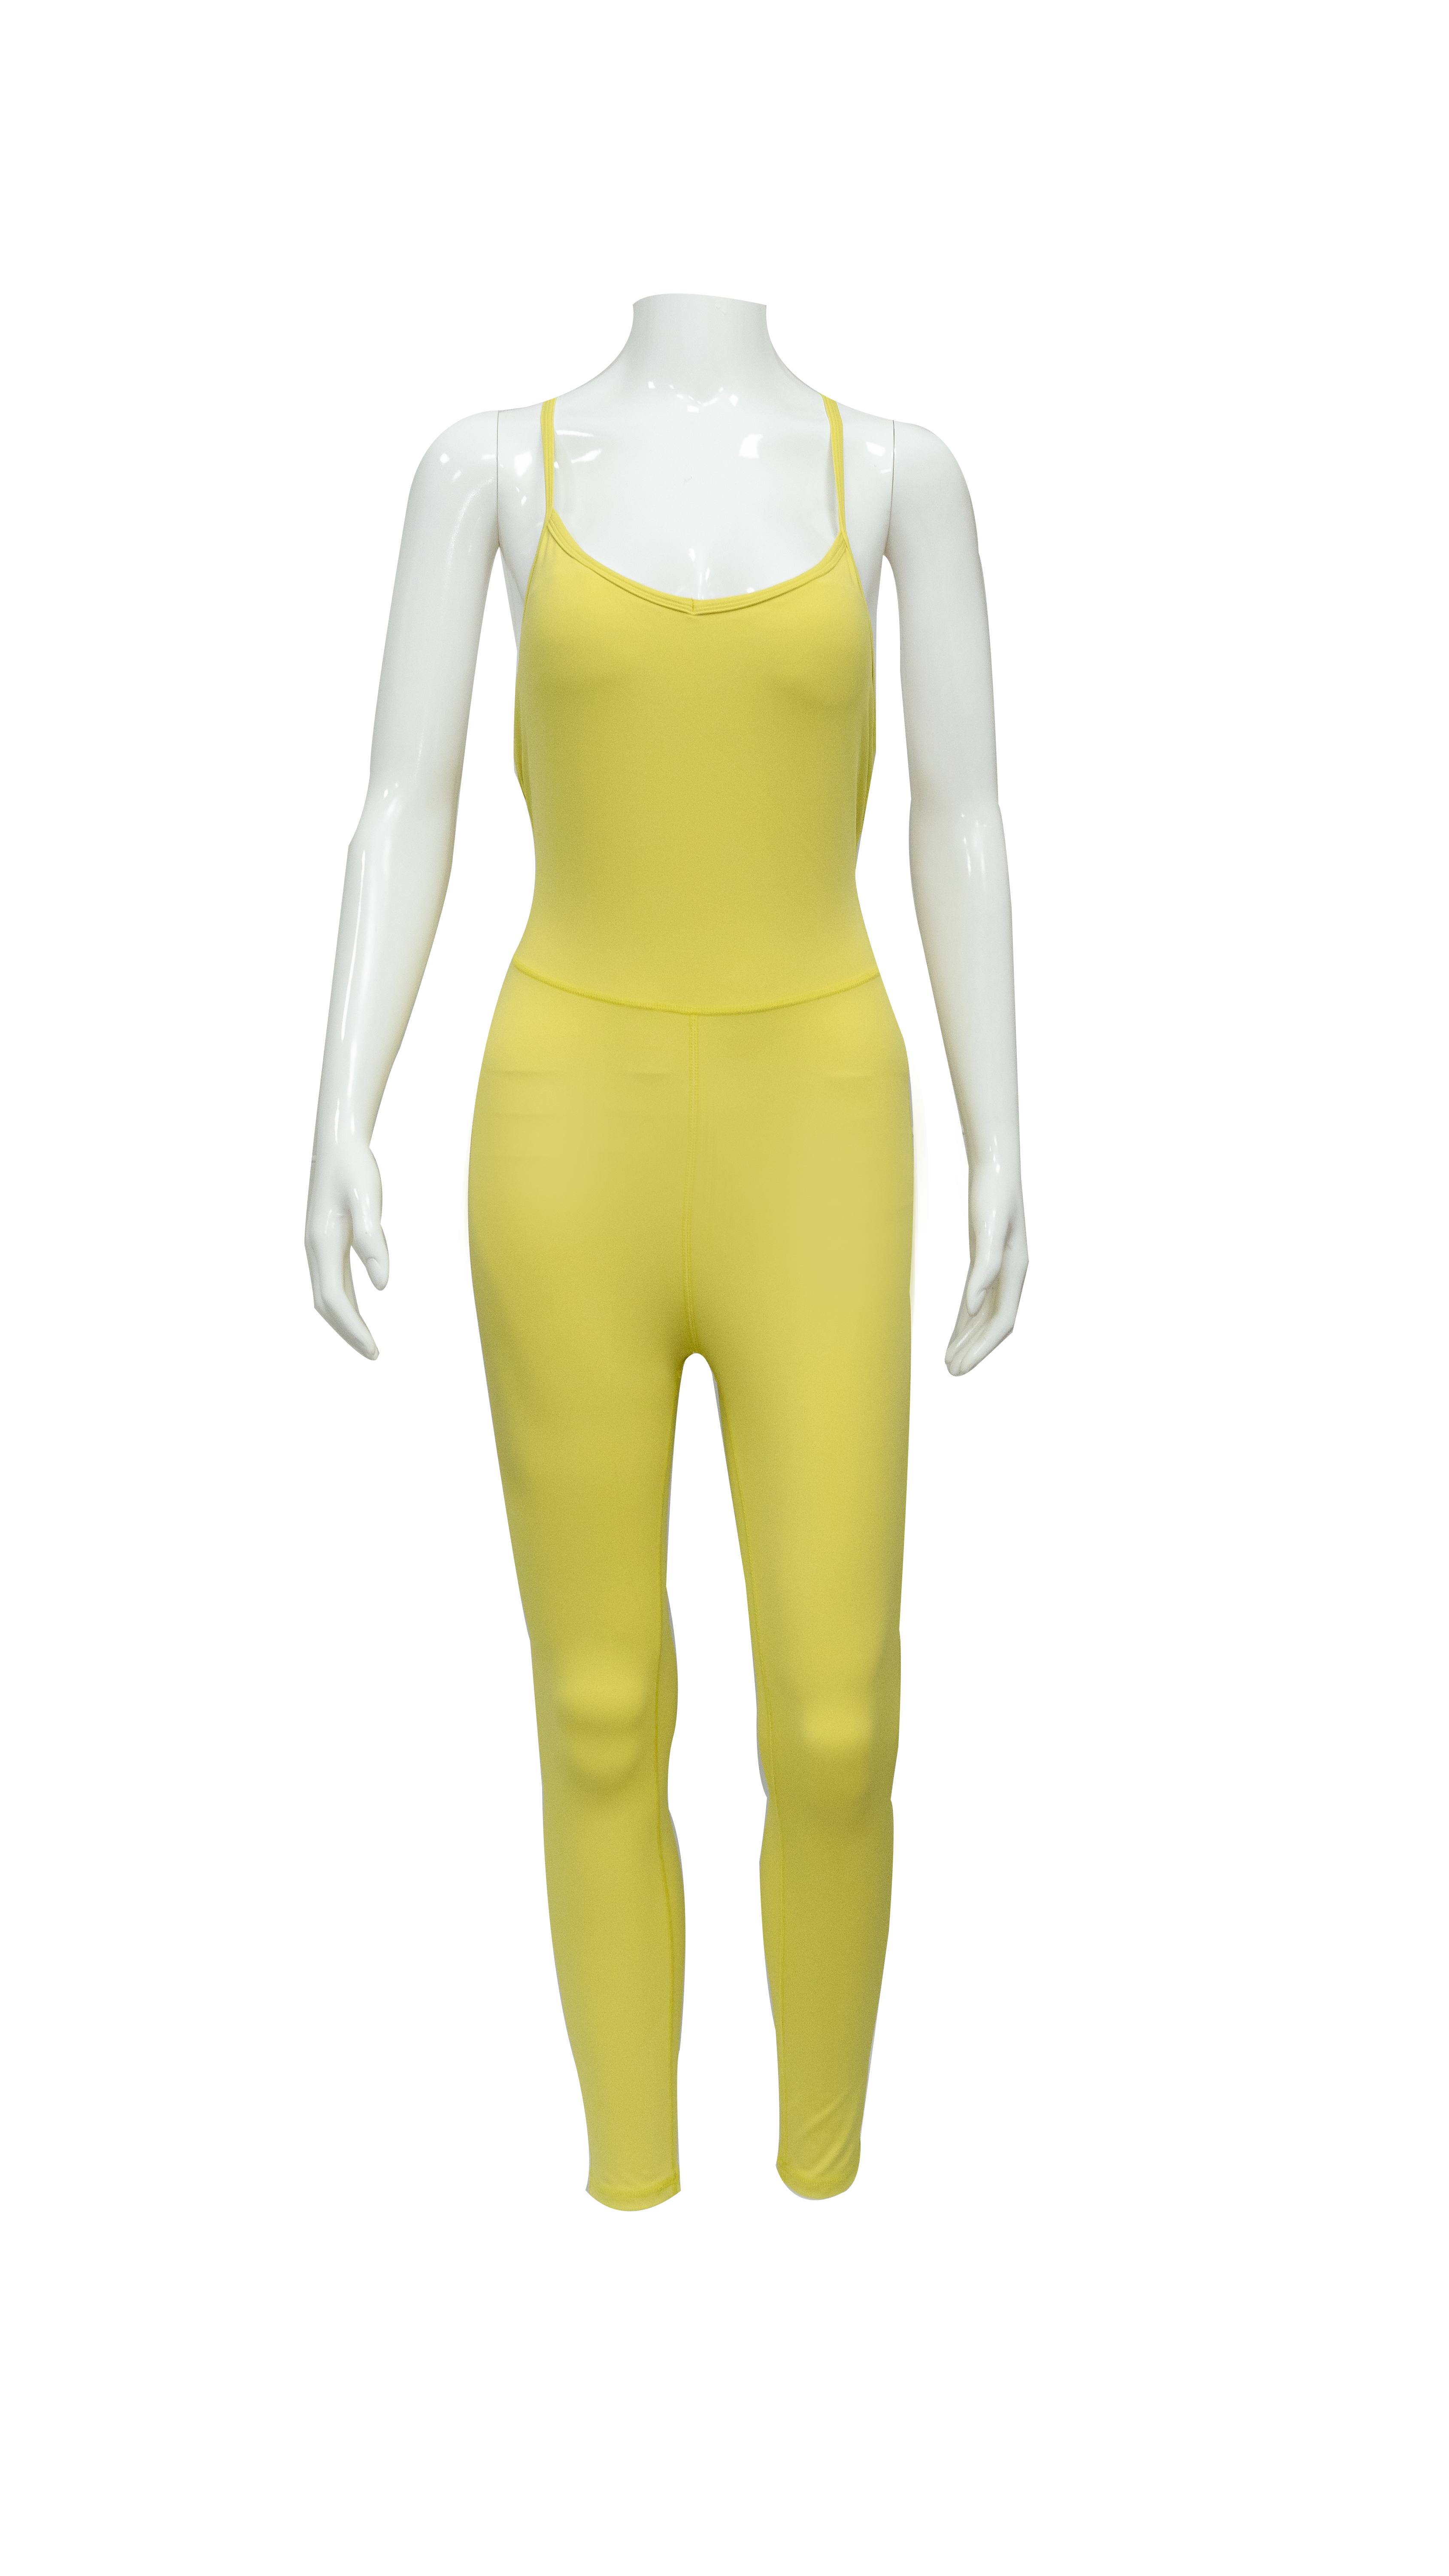 Exercise Outfit For Women – 2